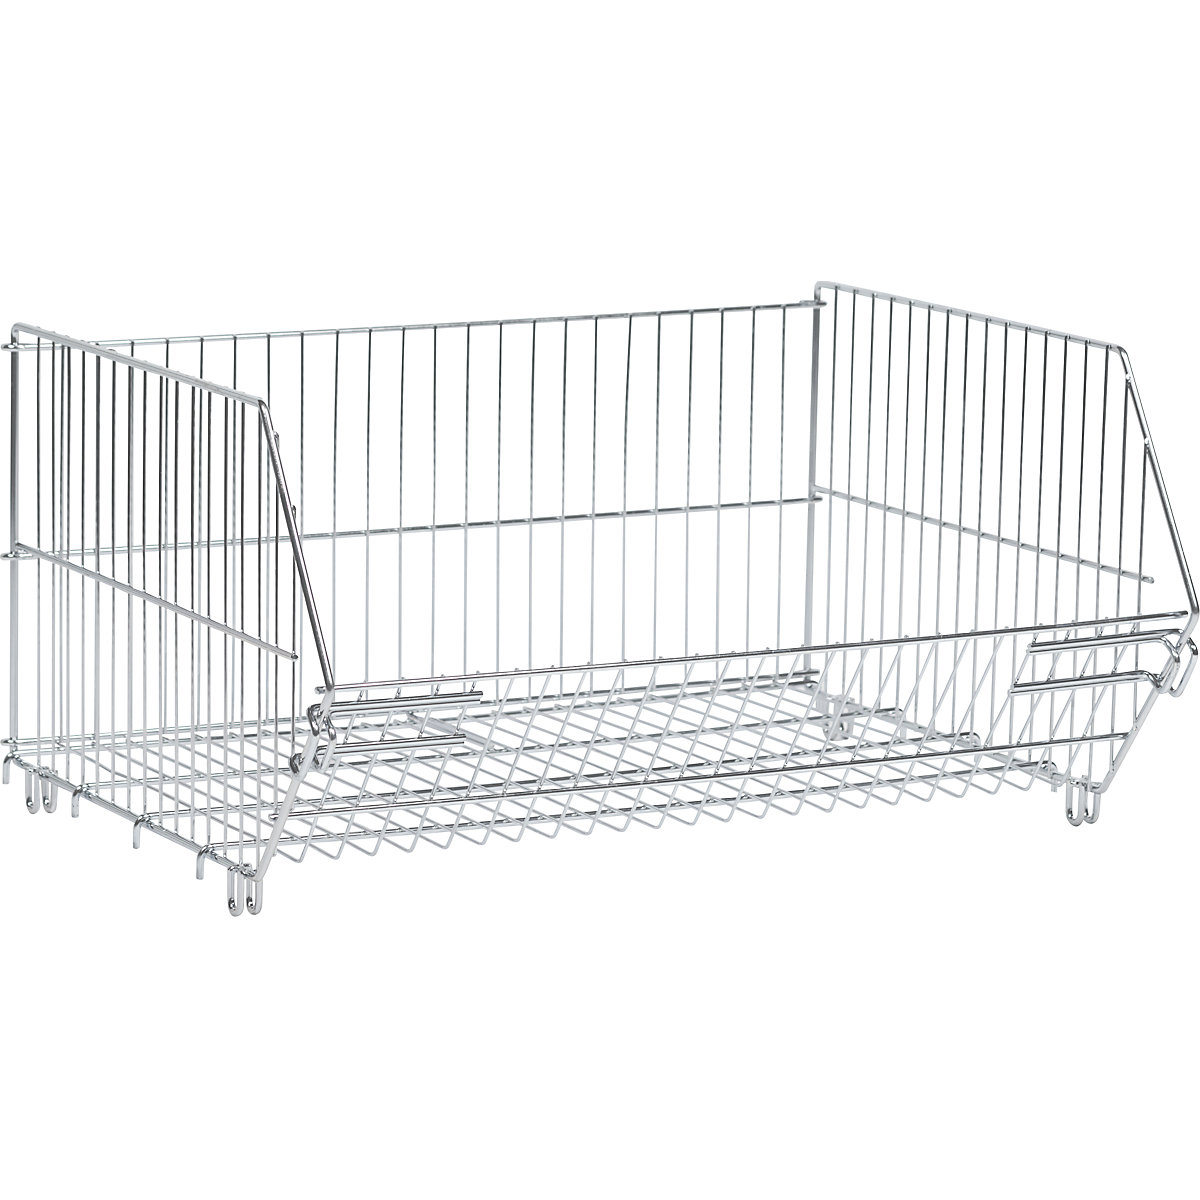 Stacking basket for shelving, LxWxH 620 x 700 x 300 mm, zinc plated-5